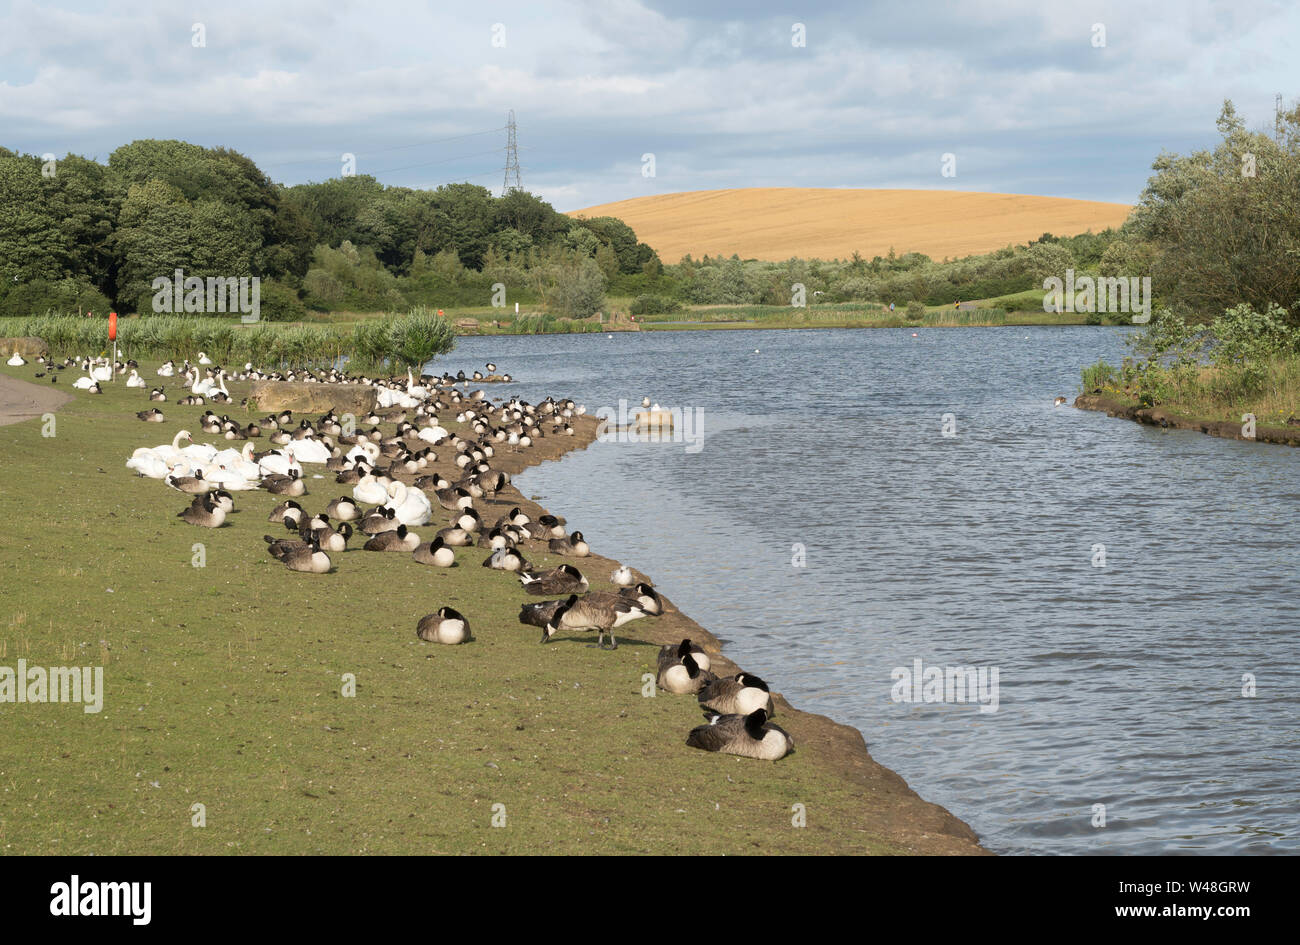 Flock of Canada Geese (Branta canadensis) and swans at the lakeside in Herrington Country Park, Sunderland, north east England, UK Stock Photo